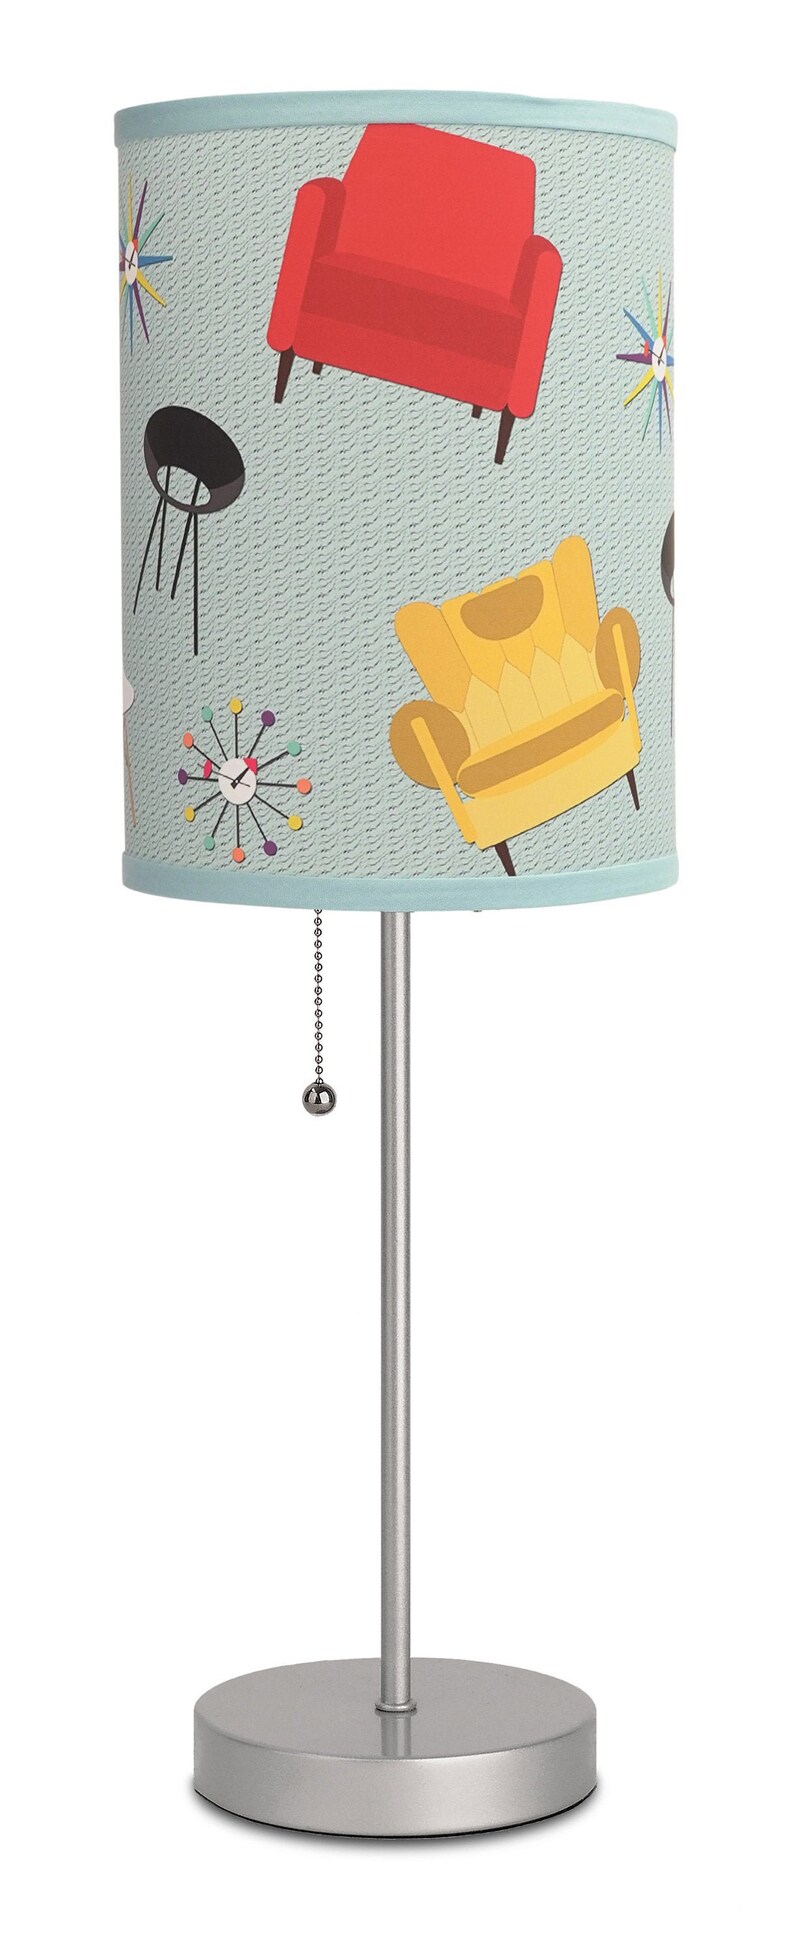 Fun Printed Lampshades Lighting Mid Century Table Lamp Modern Chairs Home Decor